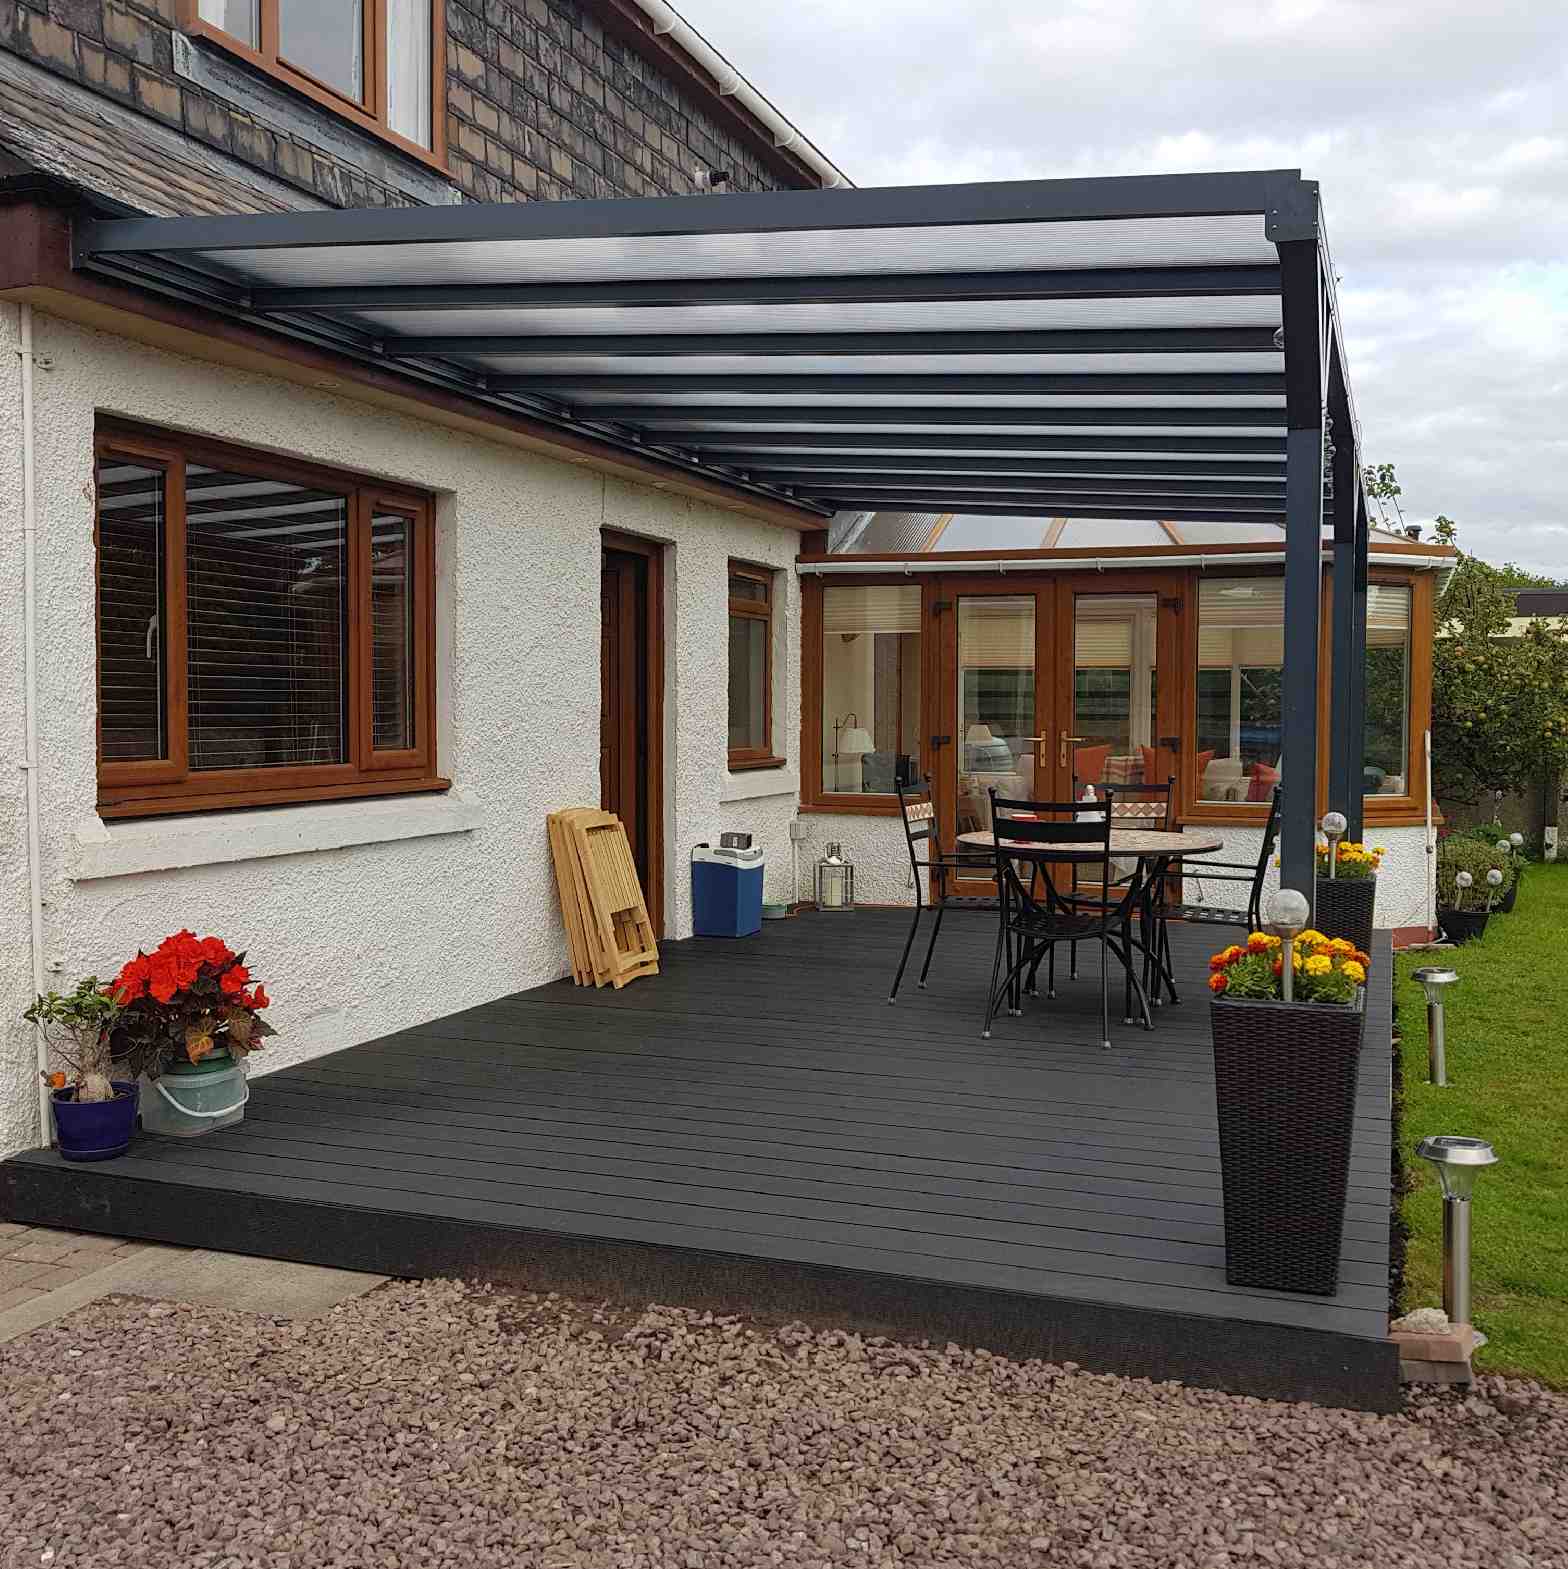 Buy Omega Verandah, Anthracite Grey, 6mm Glass Clear Plate Polycarbonate Glazing - 10.5m (W) x 2.5m (P), (5) Supporting Posts online today